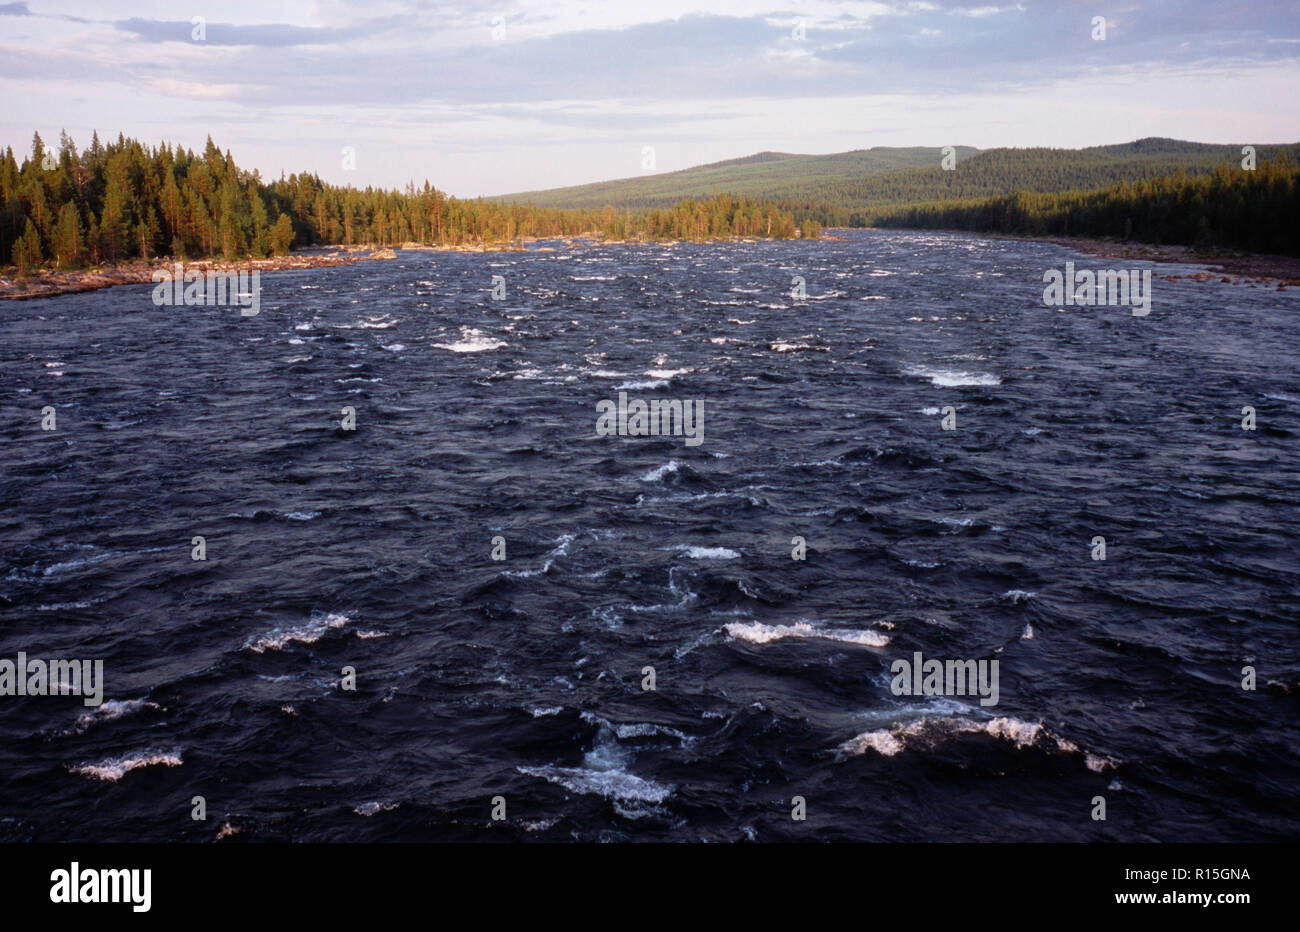 Sweden, Norrbotten, River Pitealven, View along stretch of river South East from Route 45 fifty-two kilometres North East of town of Arvidsjaur towards tree covered landscape. Stock Photo